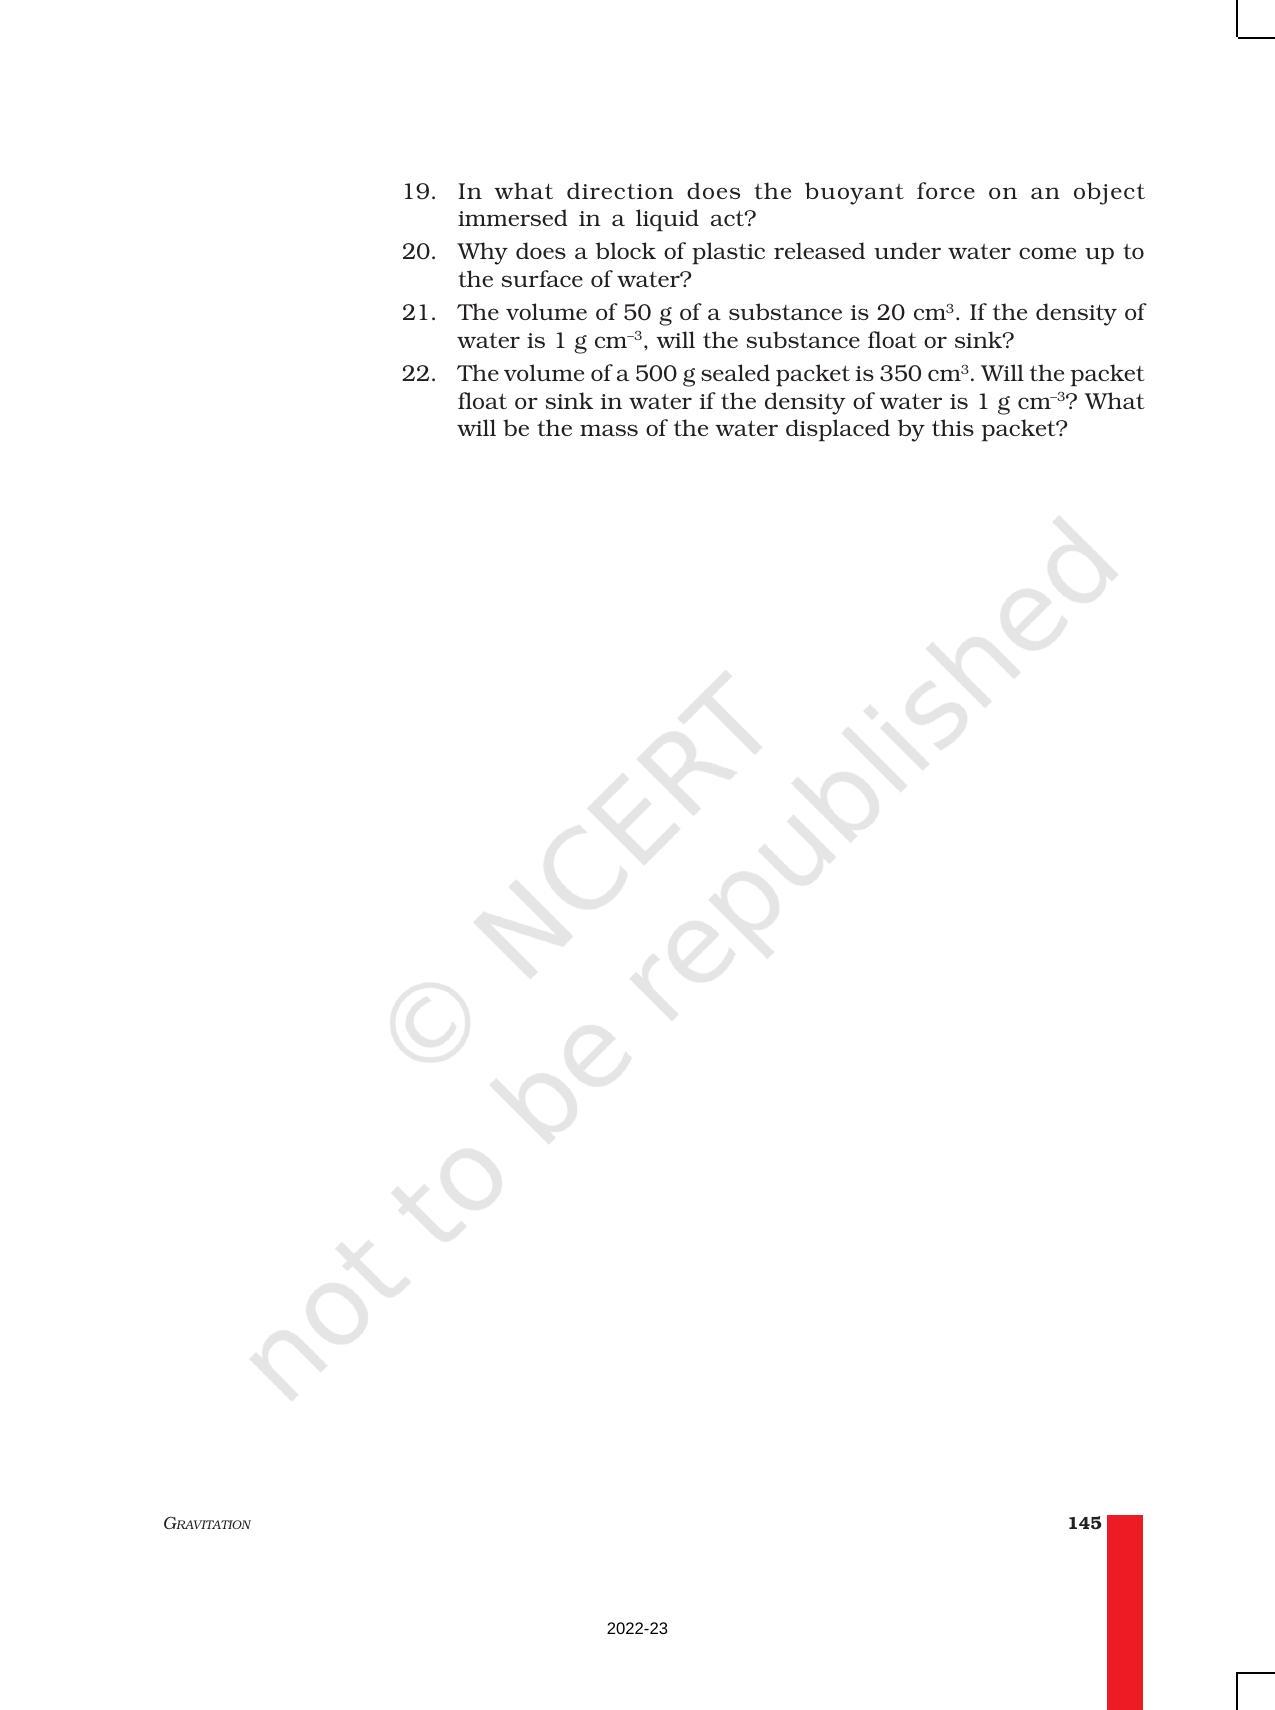 NCERT Book for Class 9 Science Chapter 10 Gravitation - Page 15